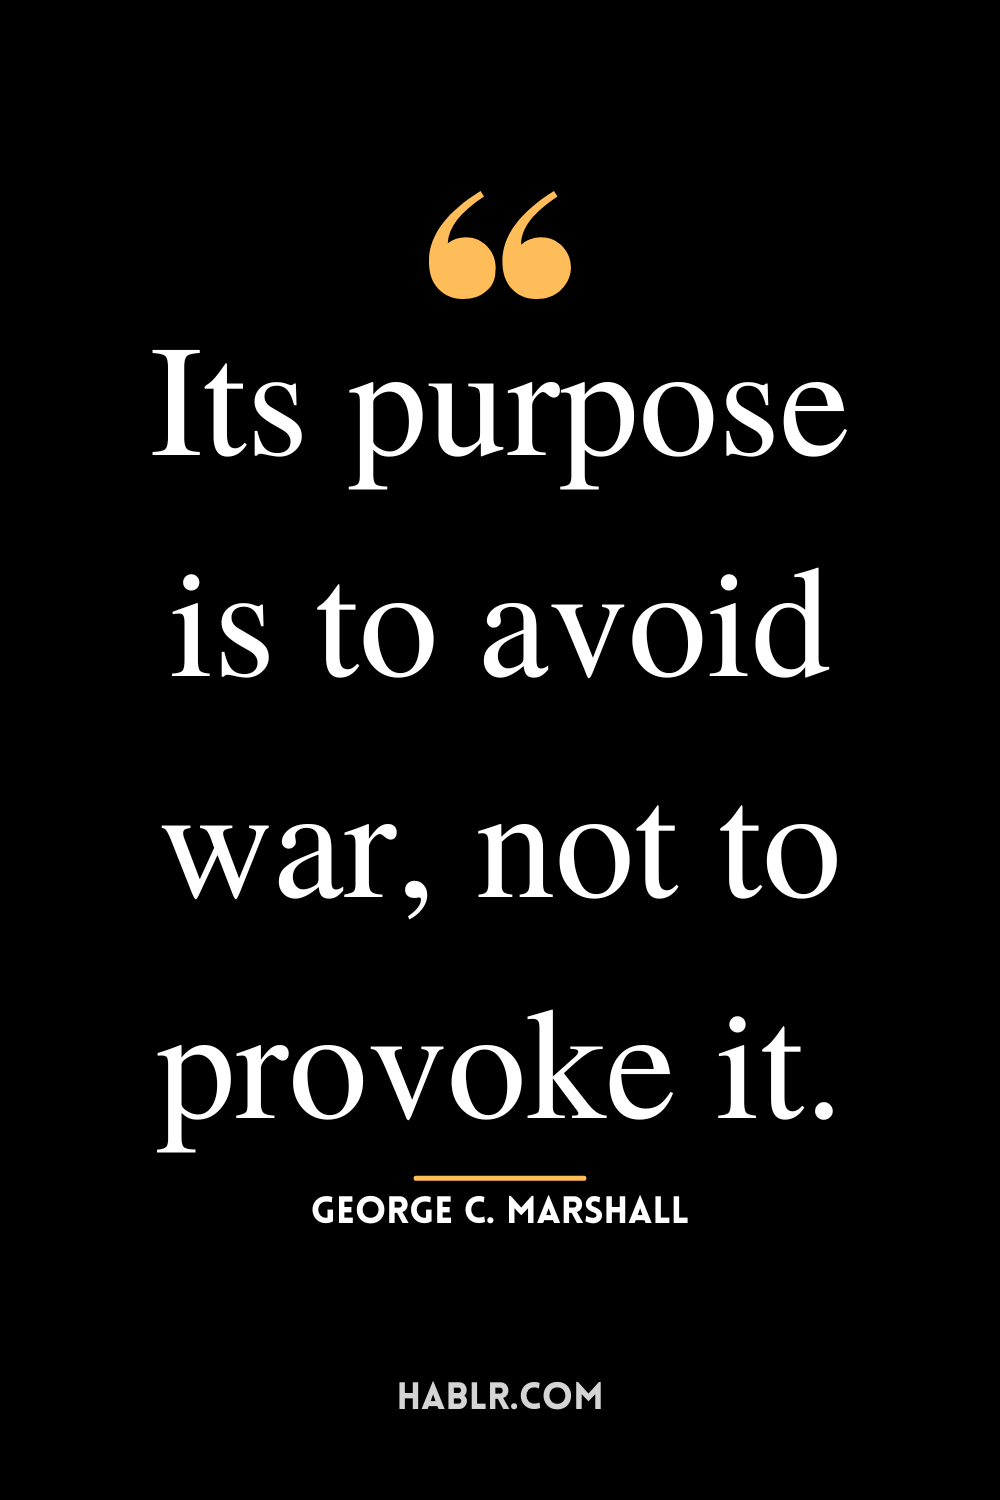 “Its purpose is to avoid war, not to provoke it.” -George C. Marshall